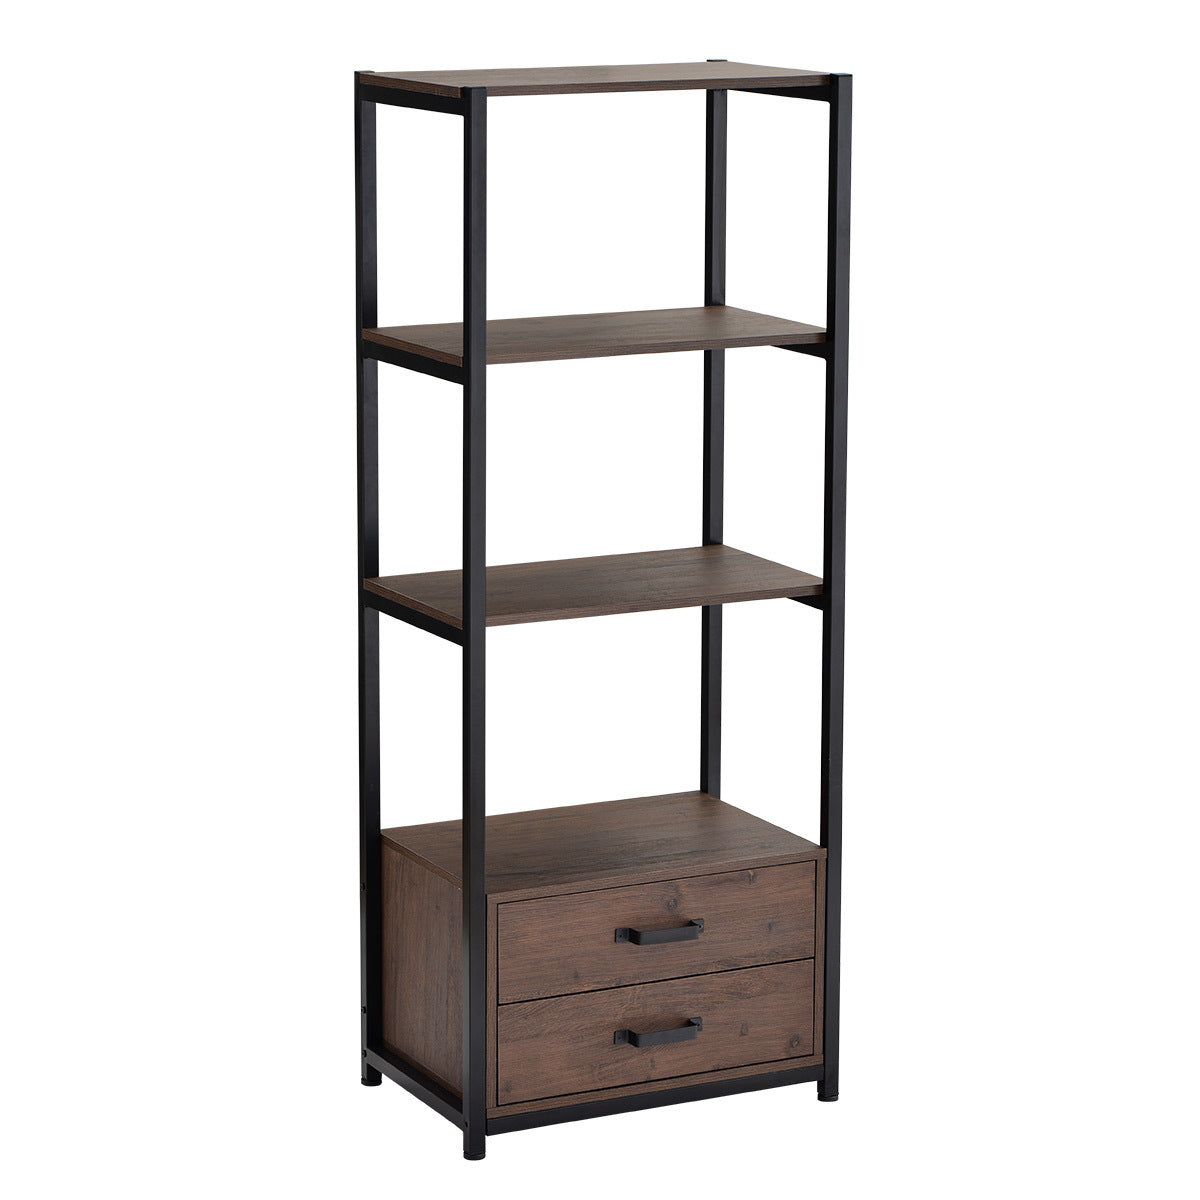 Home Office 4-Tier Bookshelf, Simple Industrial Bookcase Standing Shelf Unit Storage Organizer with 4 Open Storage Shelves and Two Drawers, Brown